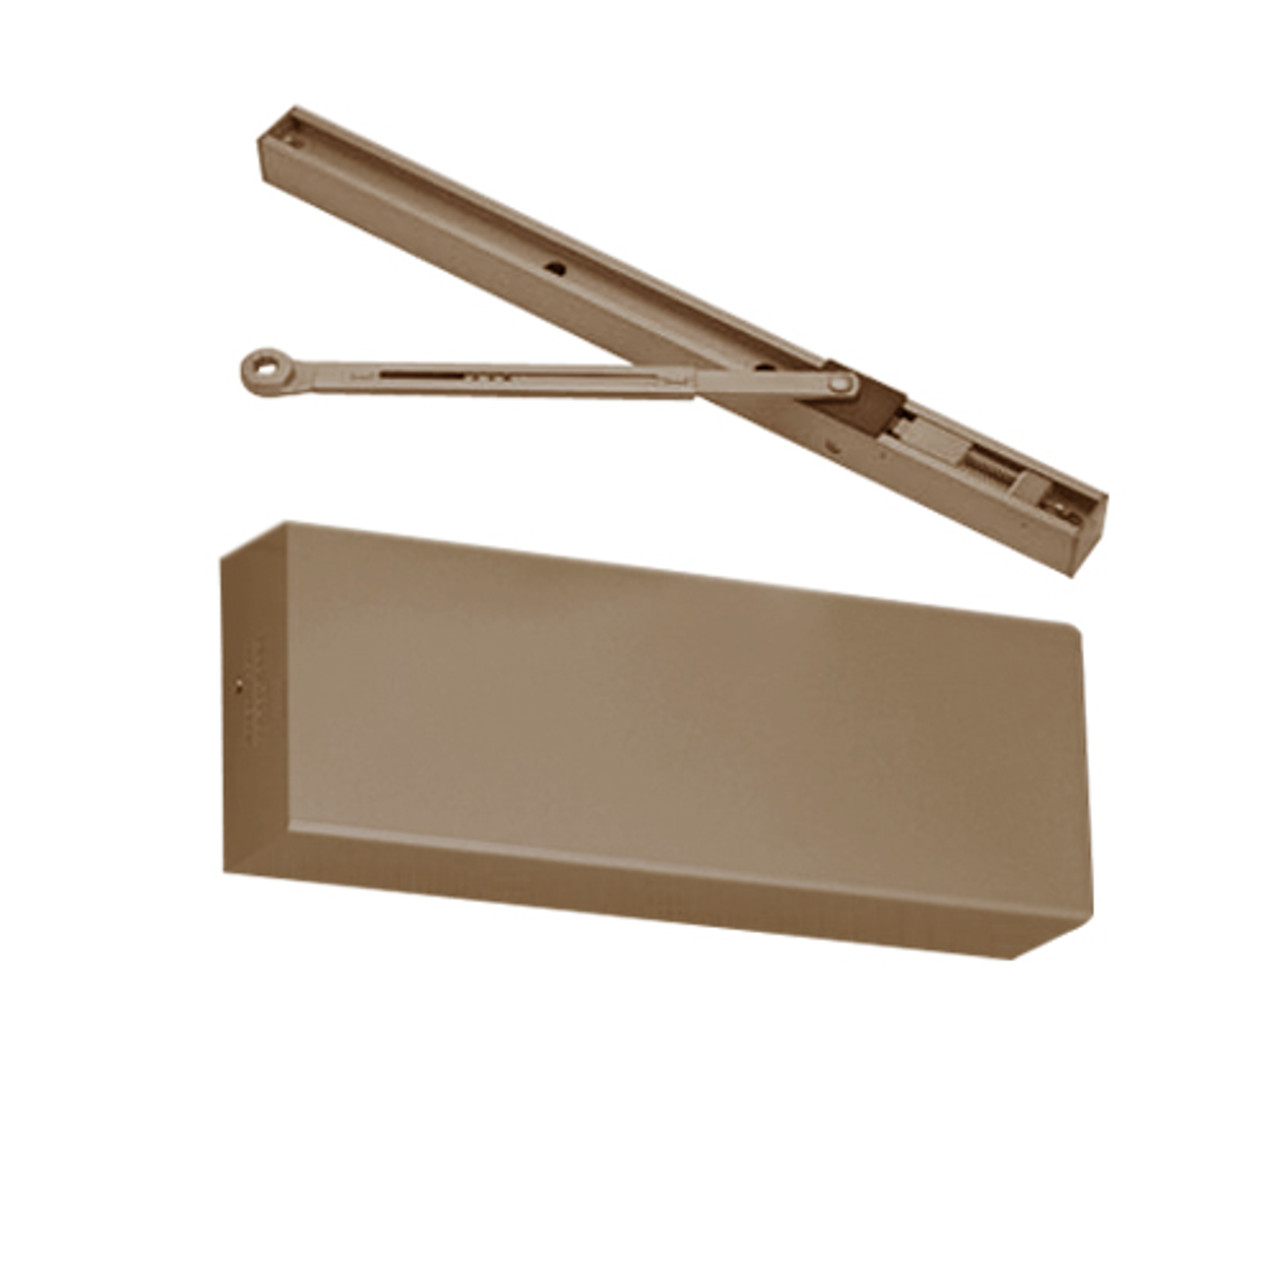 PS9500STHDA-691 Norton 9500 Series Hold Open Cast Iron Door Closer with Push Side Slide Track in Dull Bronze Finish